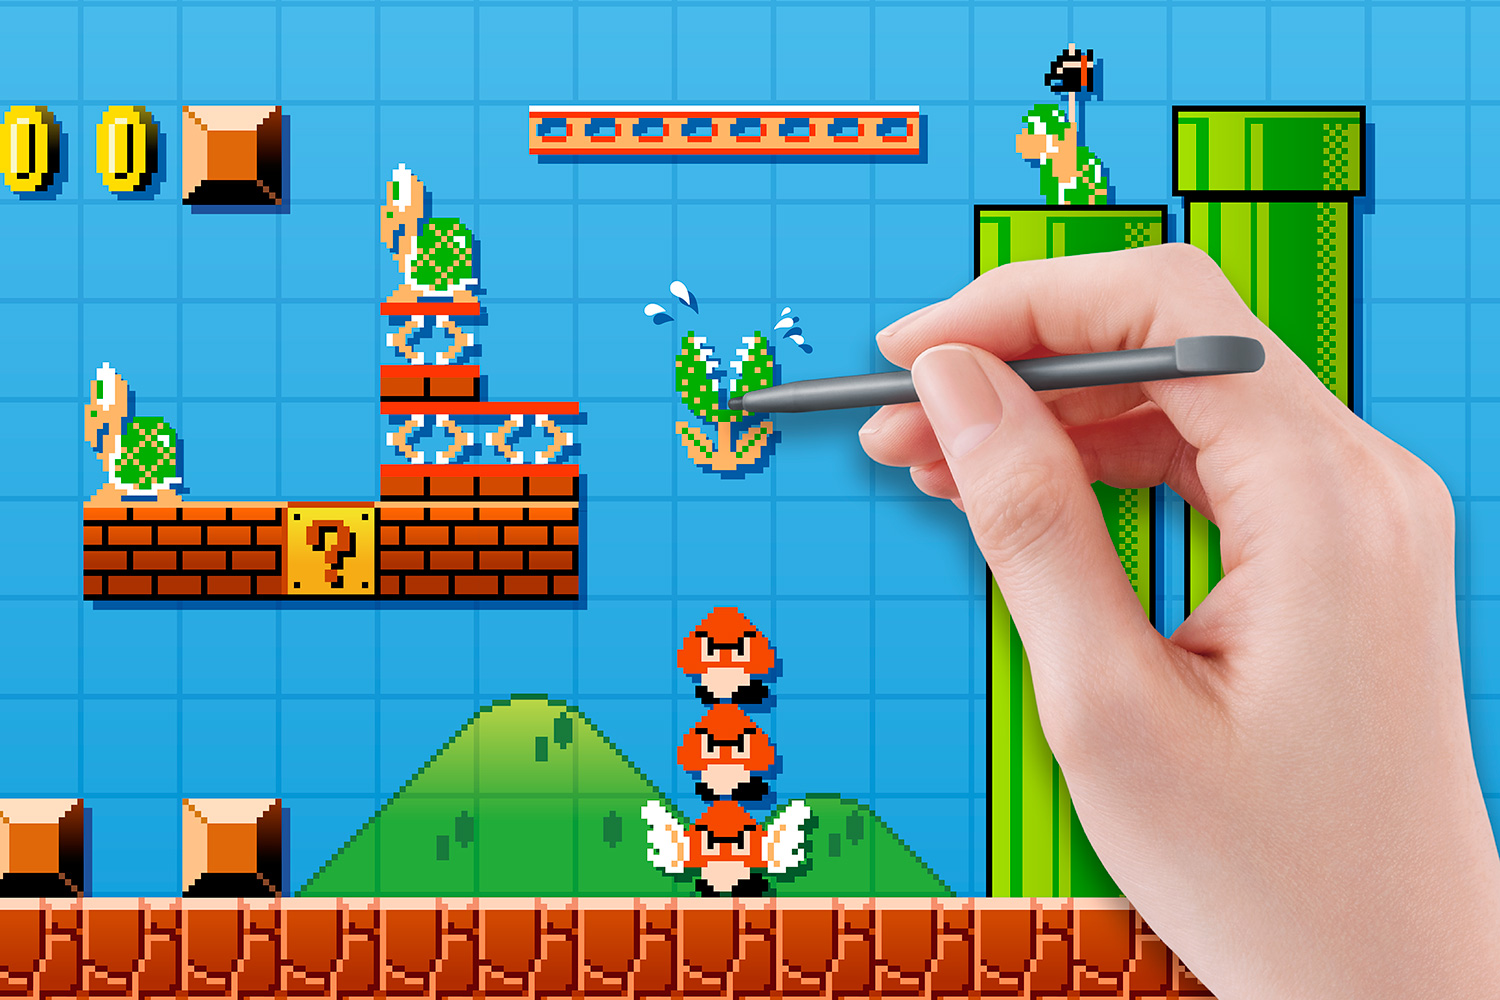 mario maker 2 differences between 3d world levels and new super mario bros levels